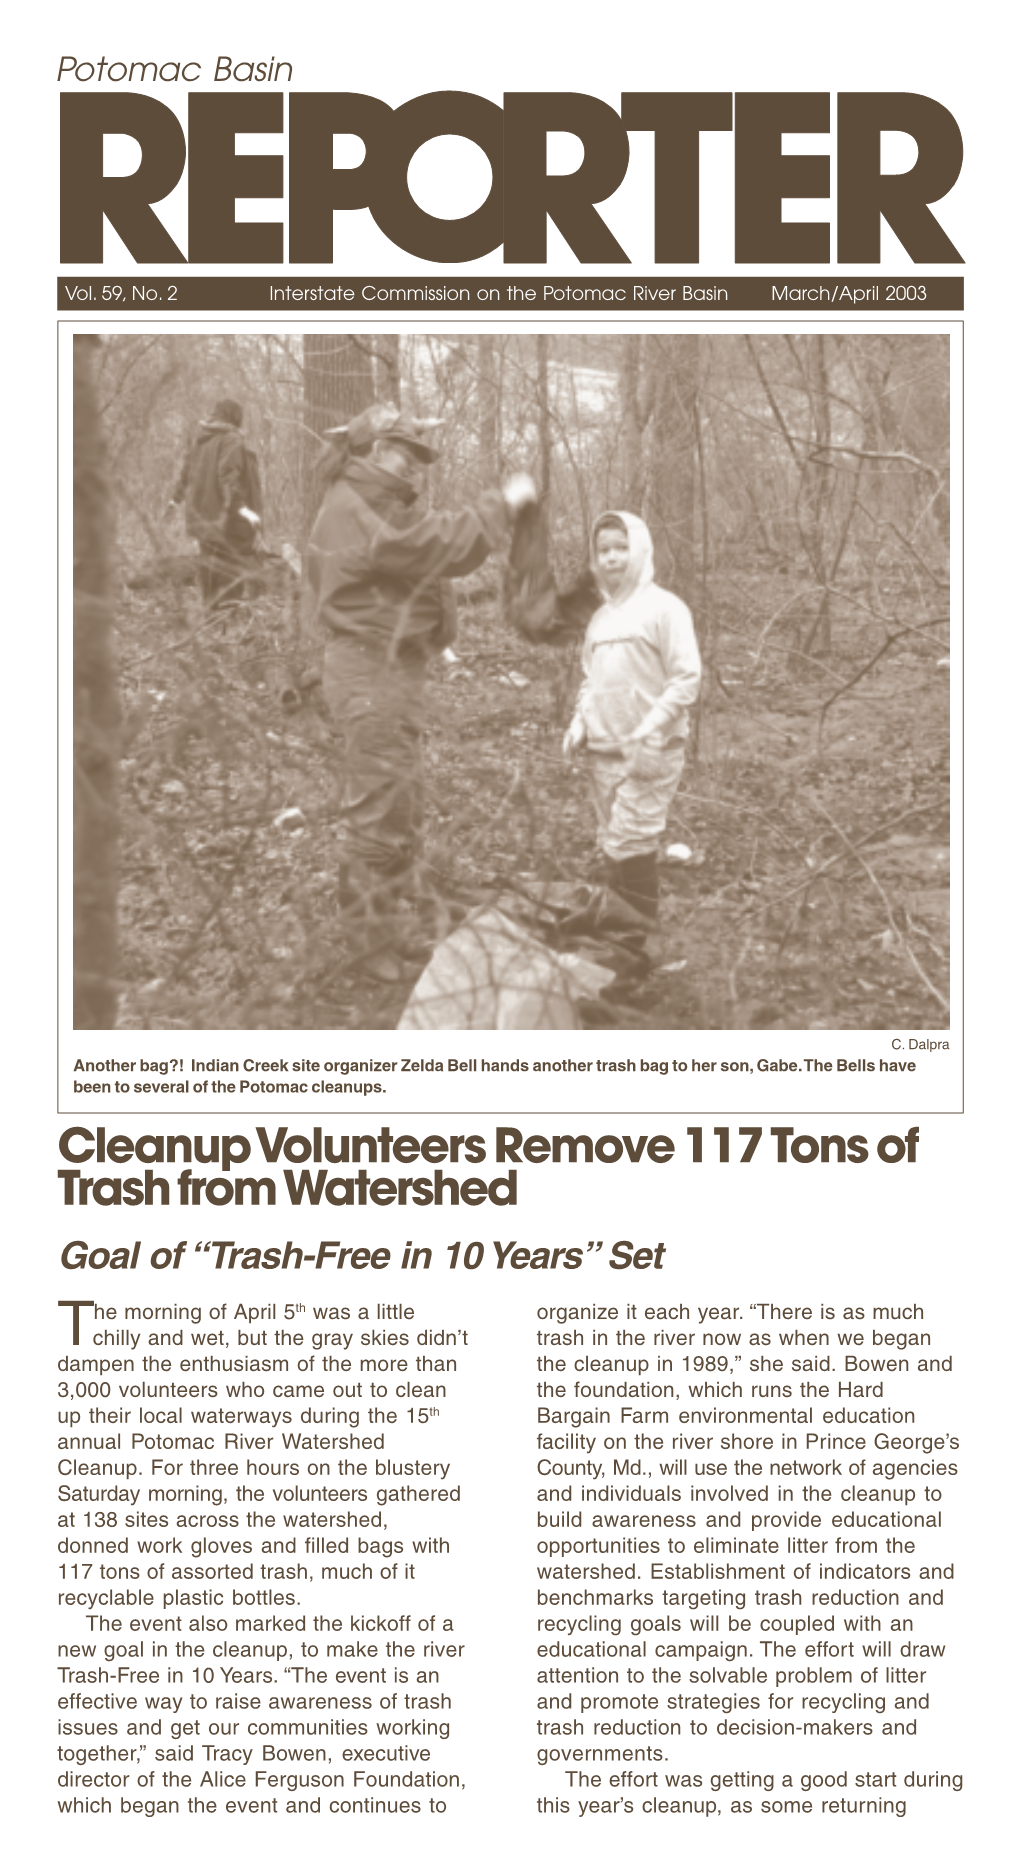 Cleanup Volunteers Remove 117 Tons of Trash from Watershed Goal of “Trash-Free in 10 Years” Set